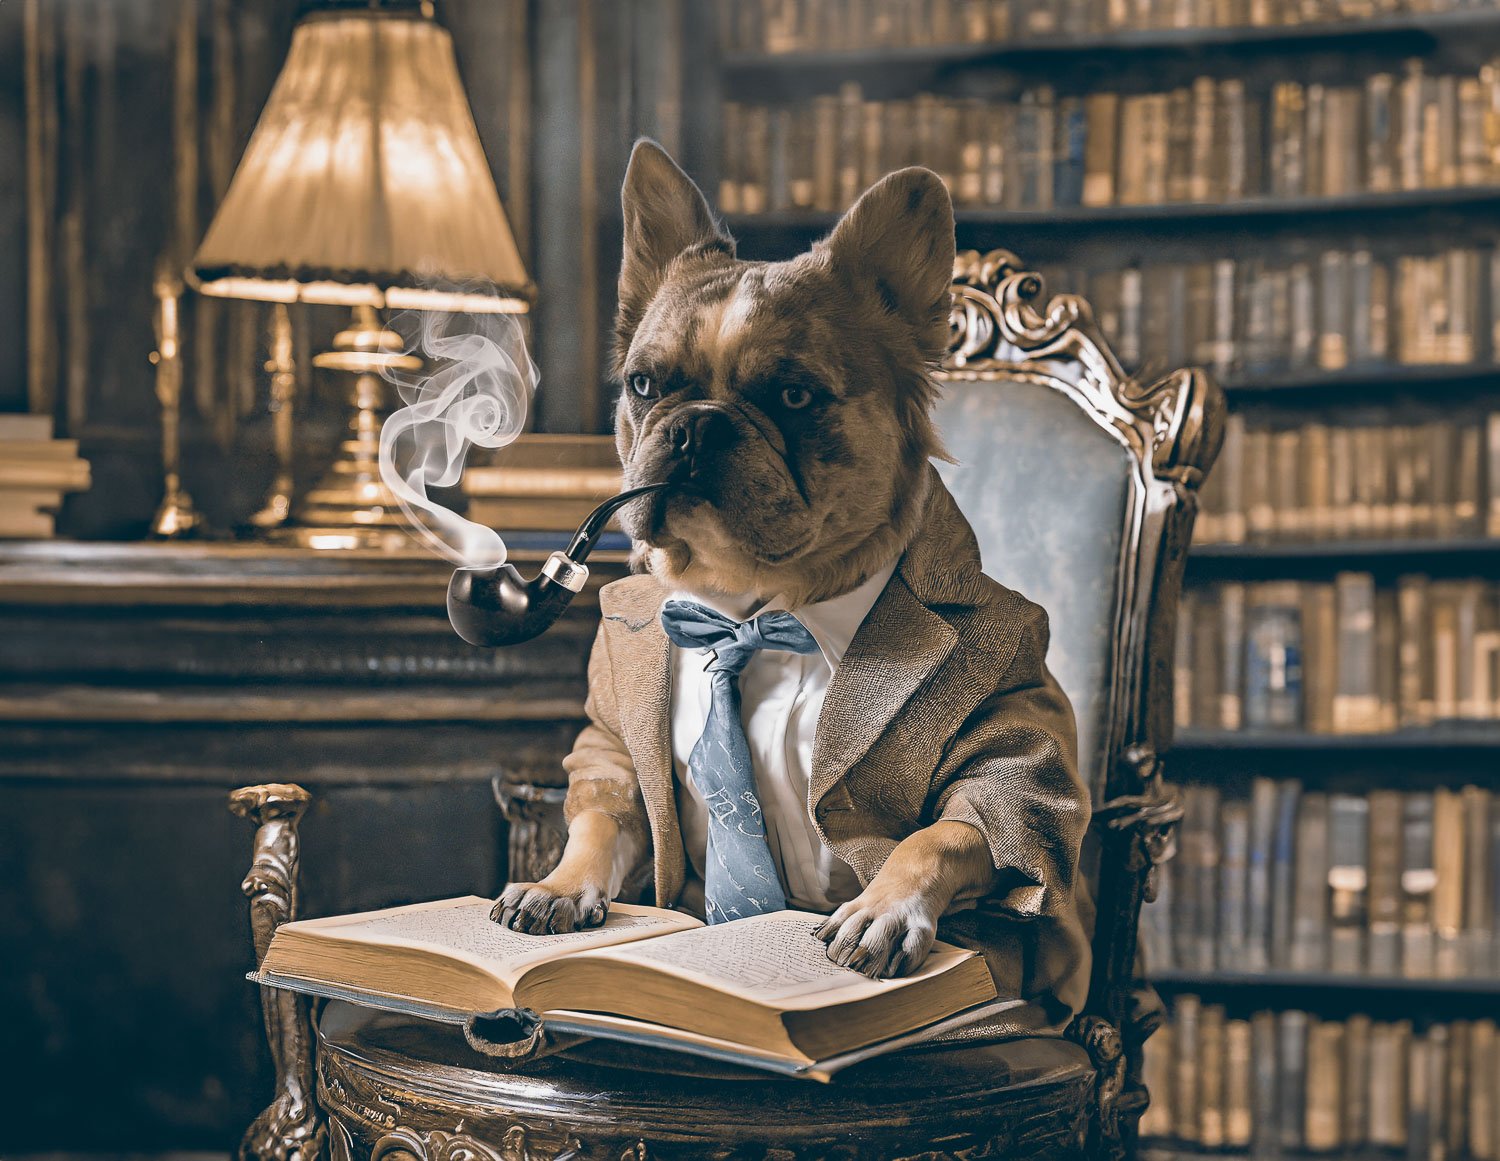 A french bulldog sitting on a chair in a library wearing a smoking jacket and blue tie with his paws on a book and smoking a pipe